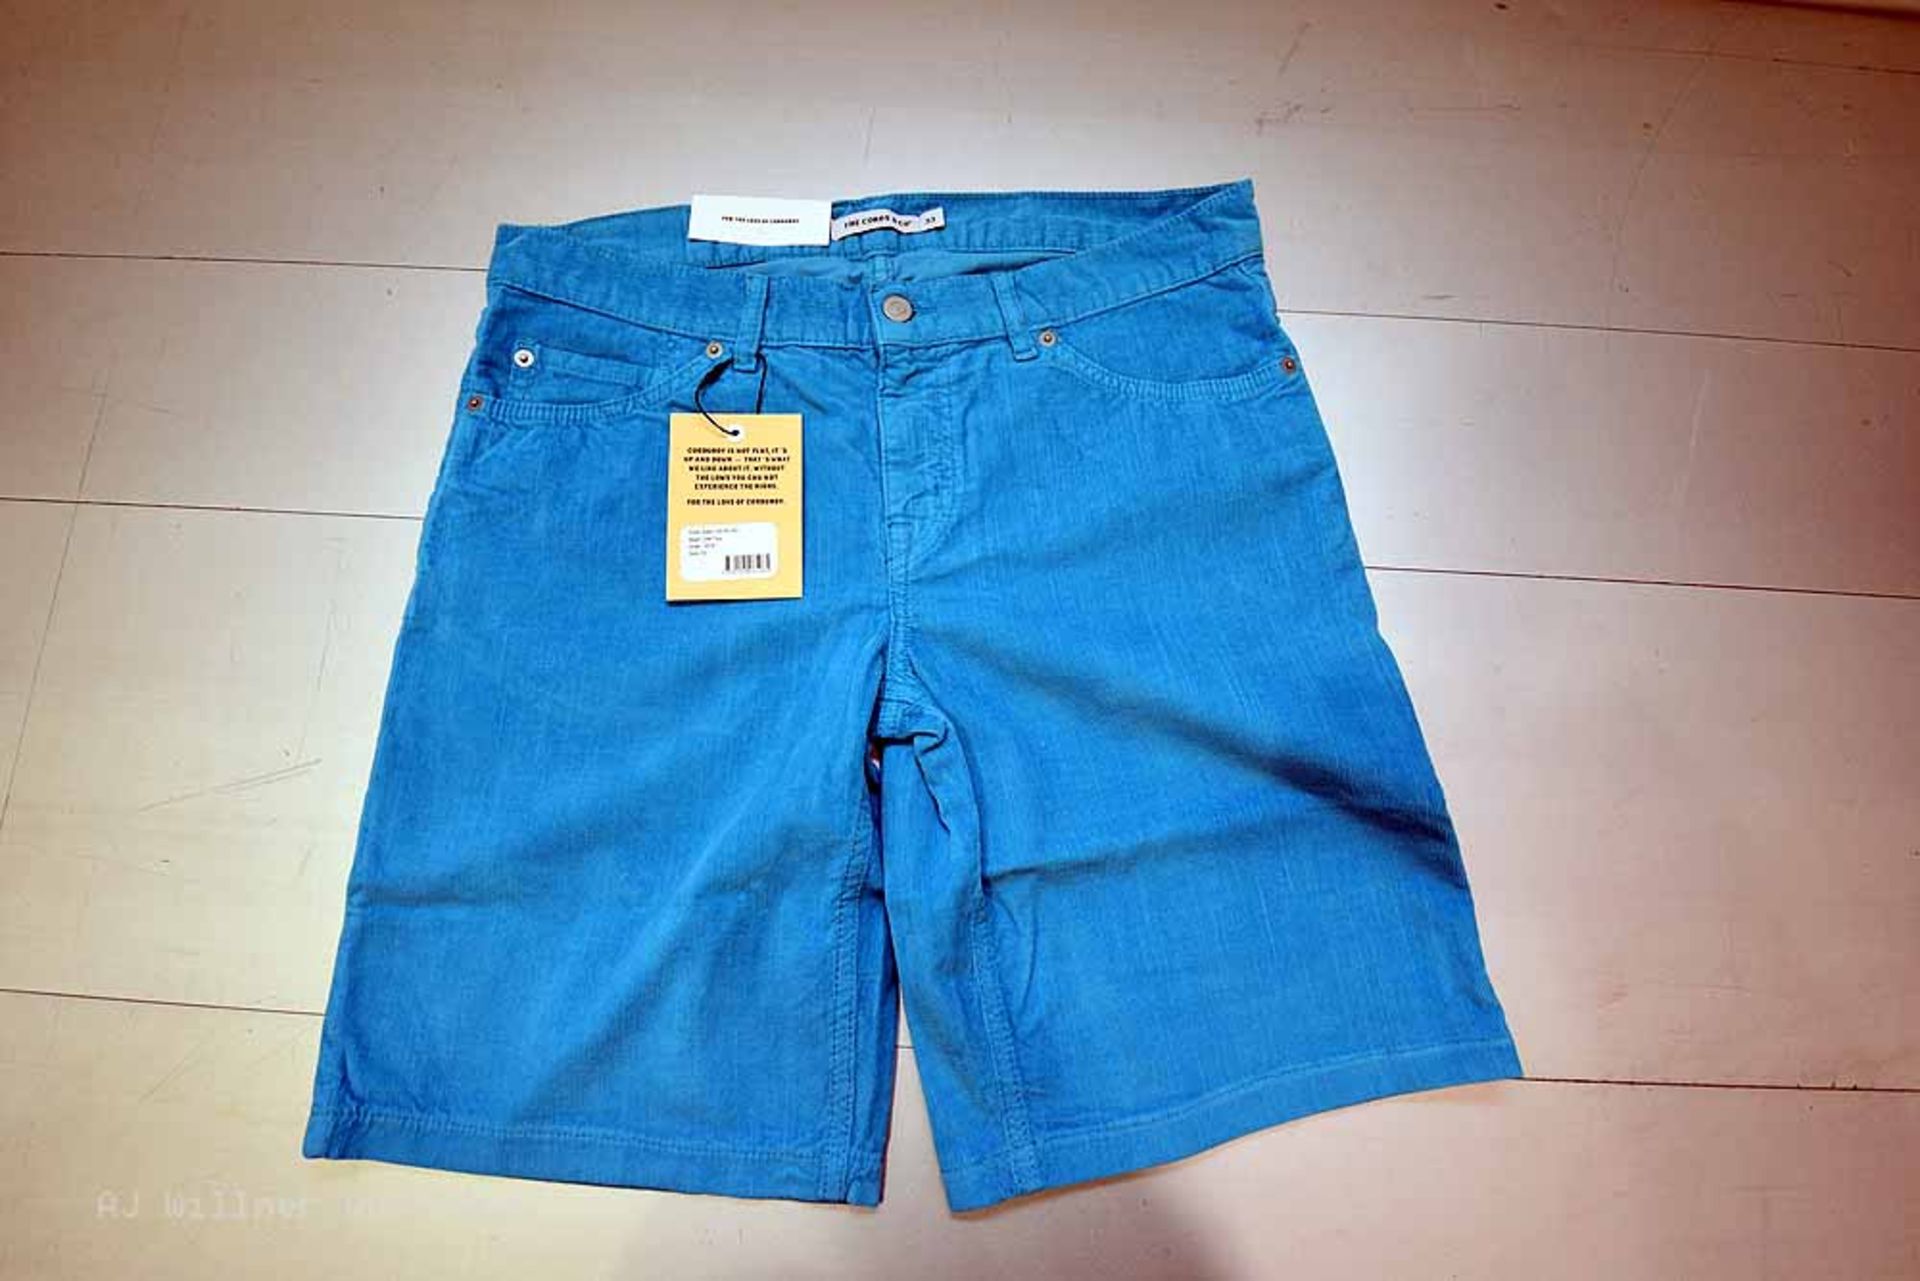 The Cords & Co. "Adam" Style, Men's 5-Pocket Mid-Waist/Classic Fit Shorts,Azure/Silver/Turq/Indigo - Image 8 of 10